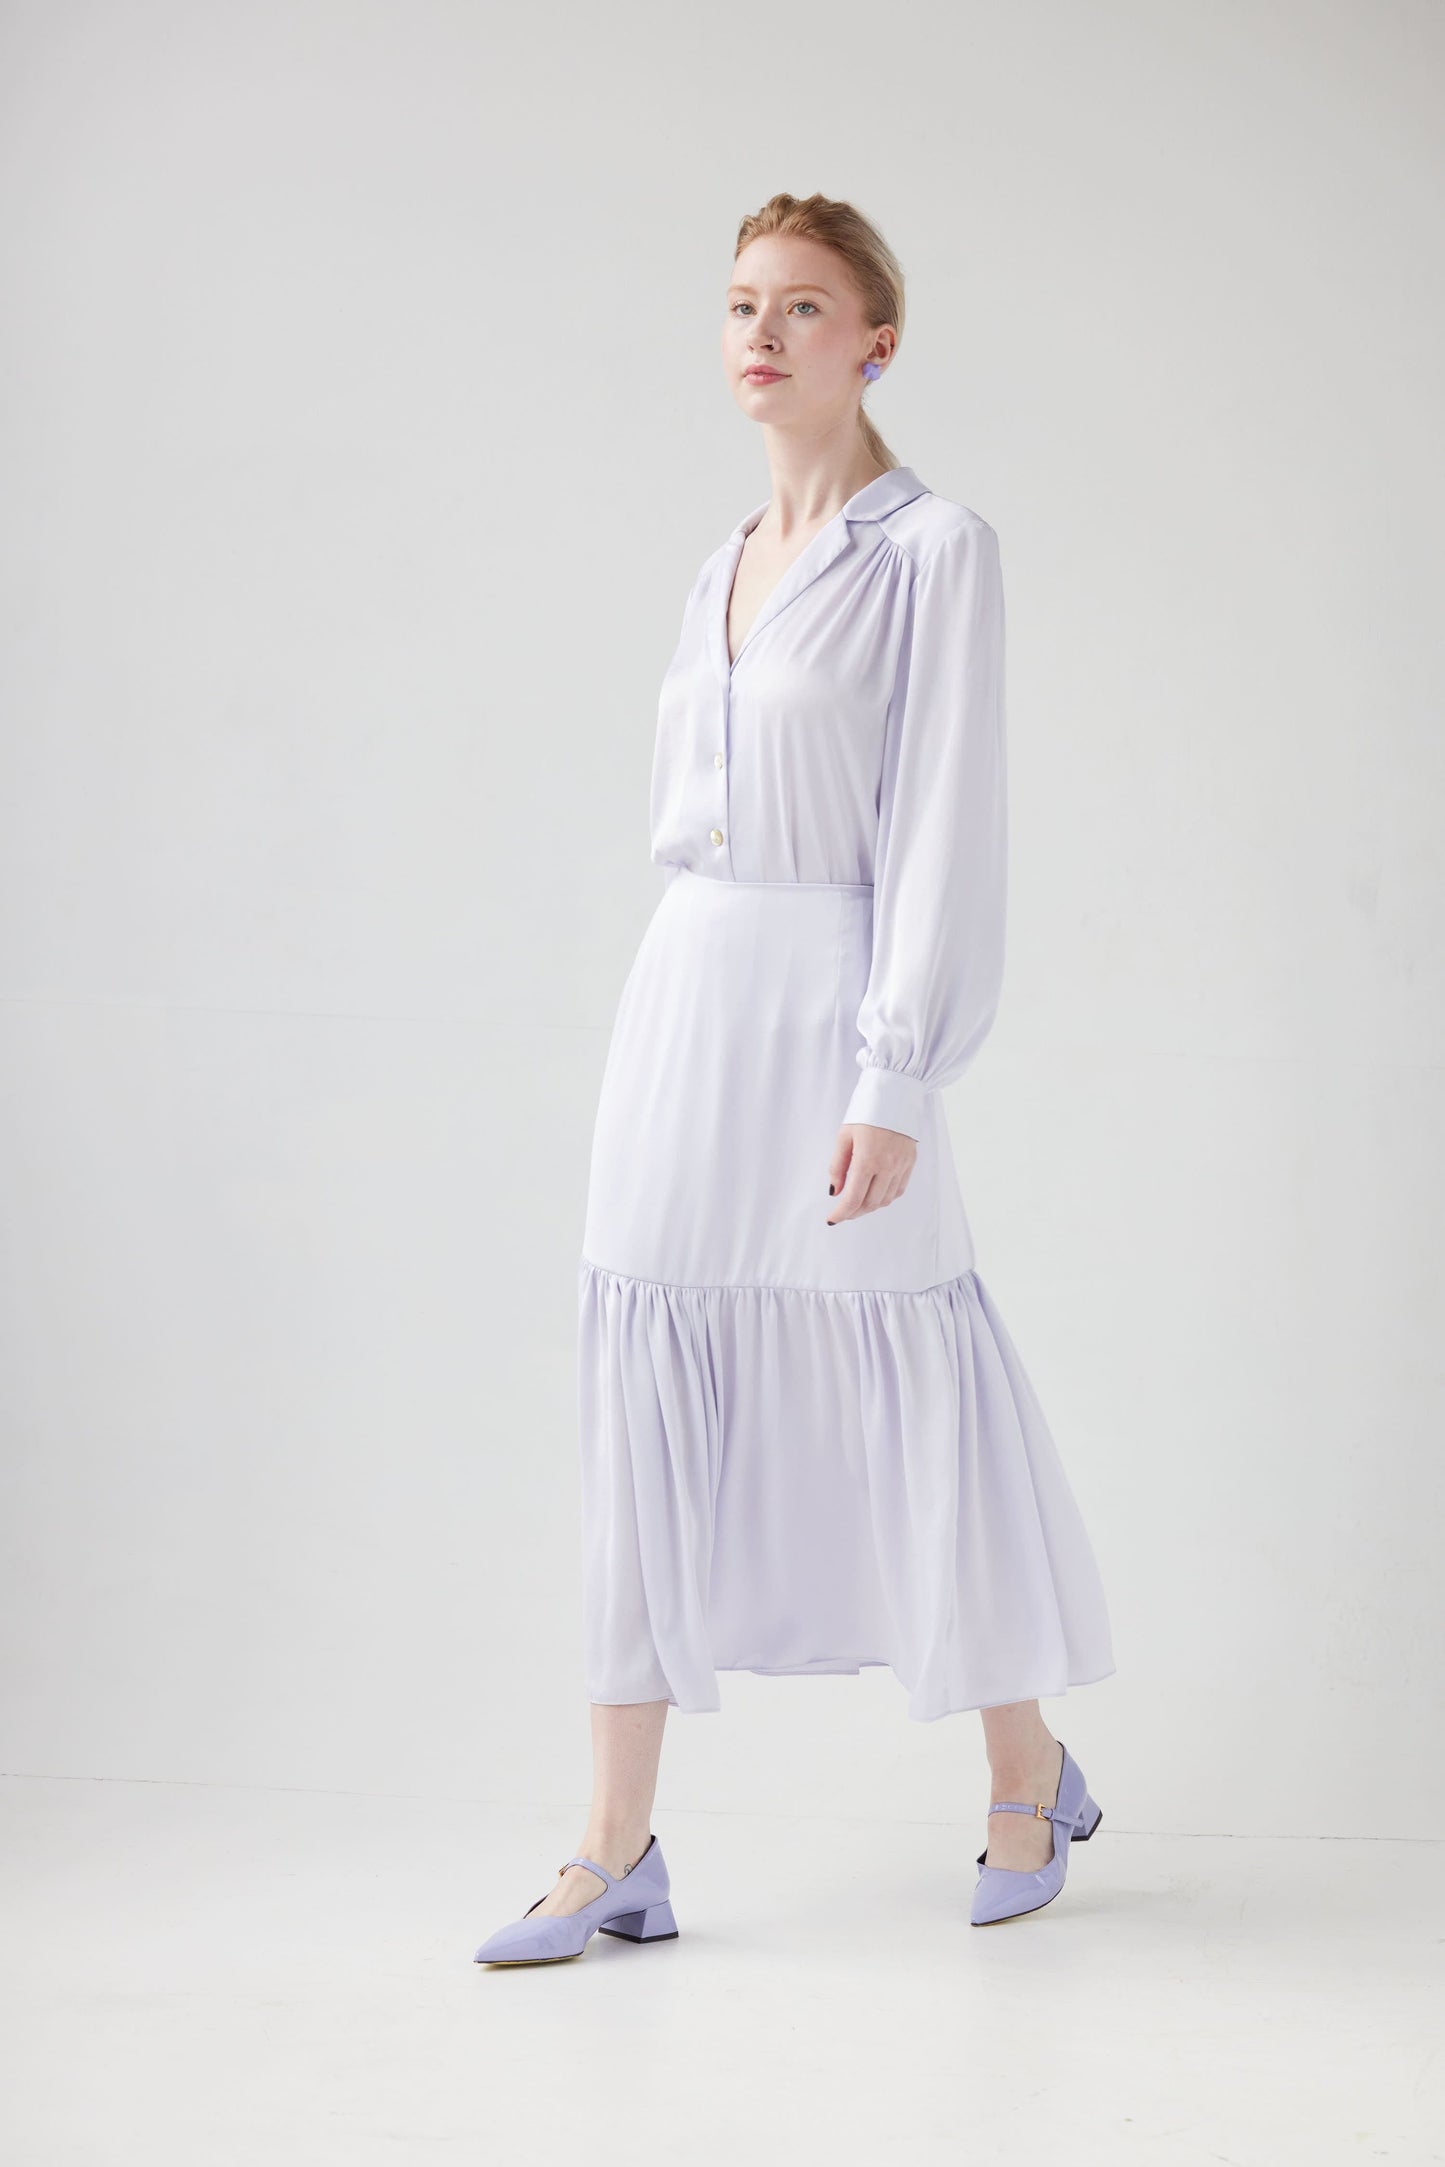 Colette Skirt in Japanese Charmeuse Skirts Christine Alcalay Light Lilac 0 